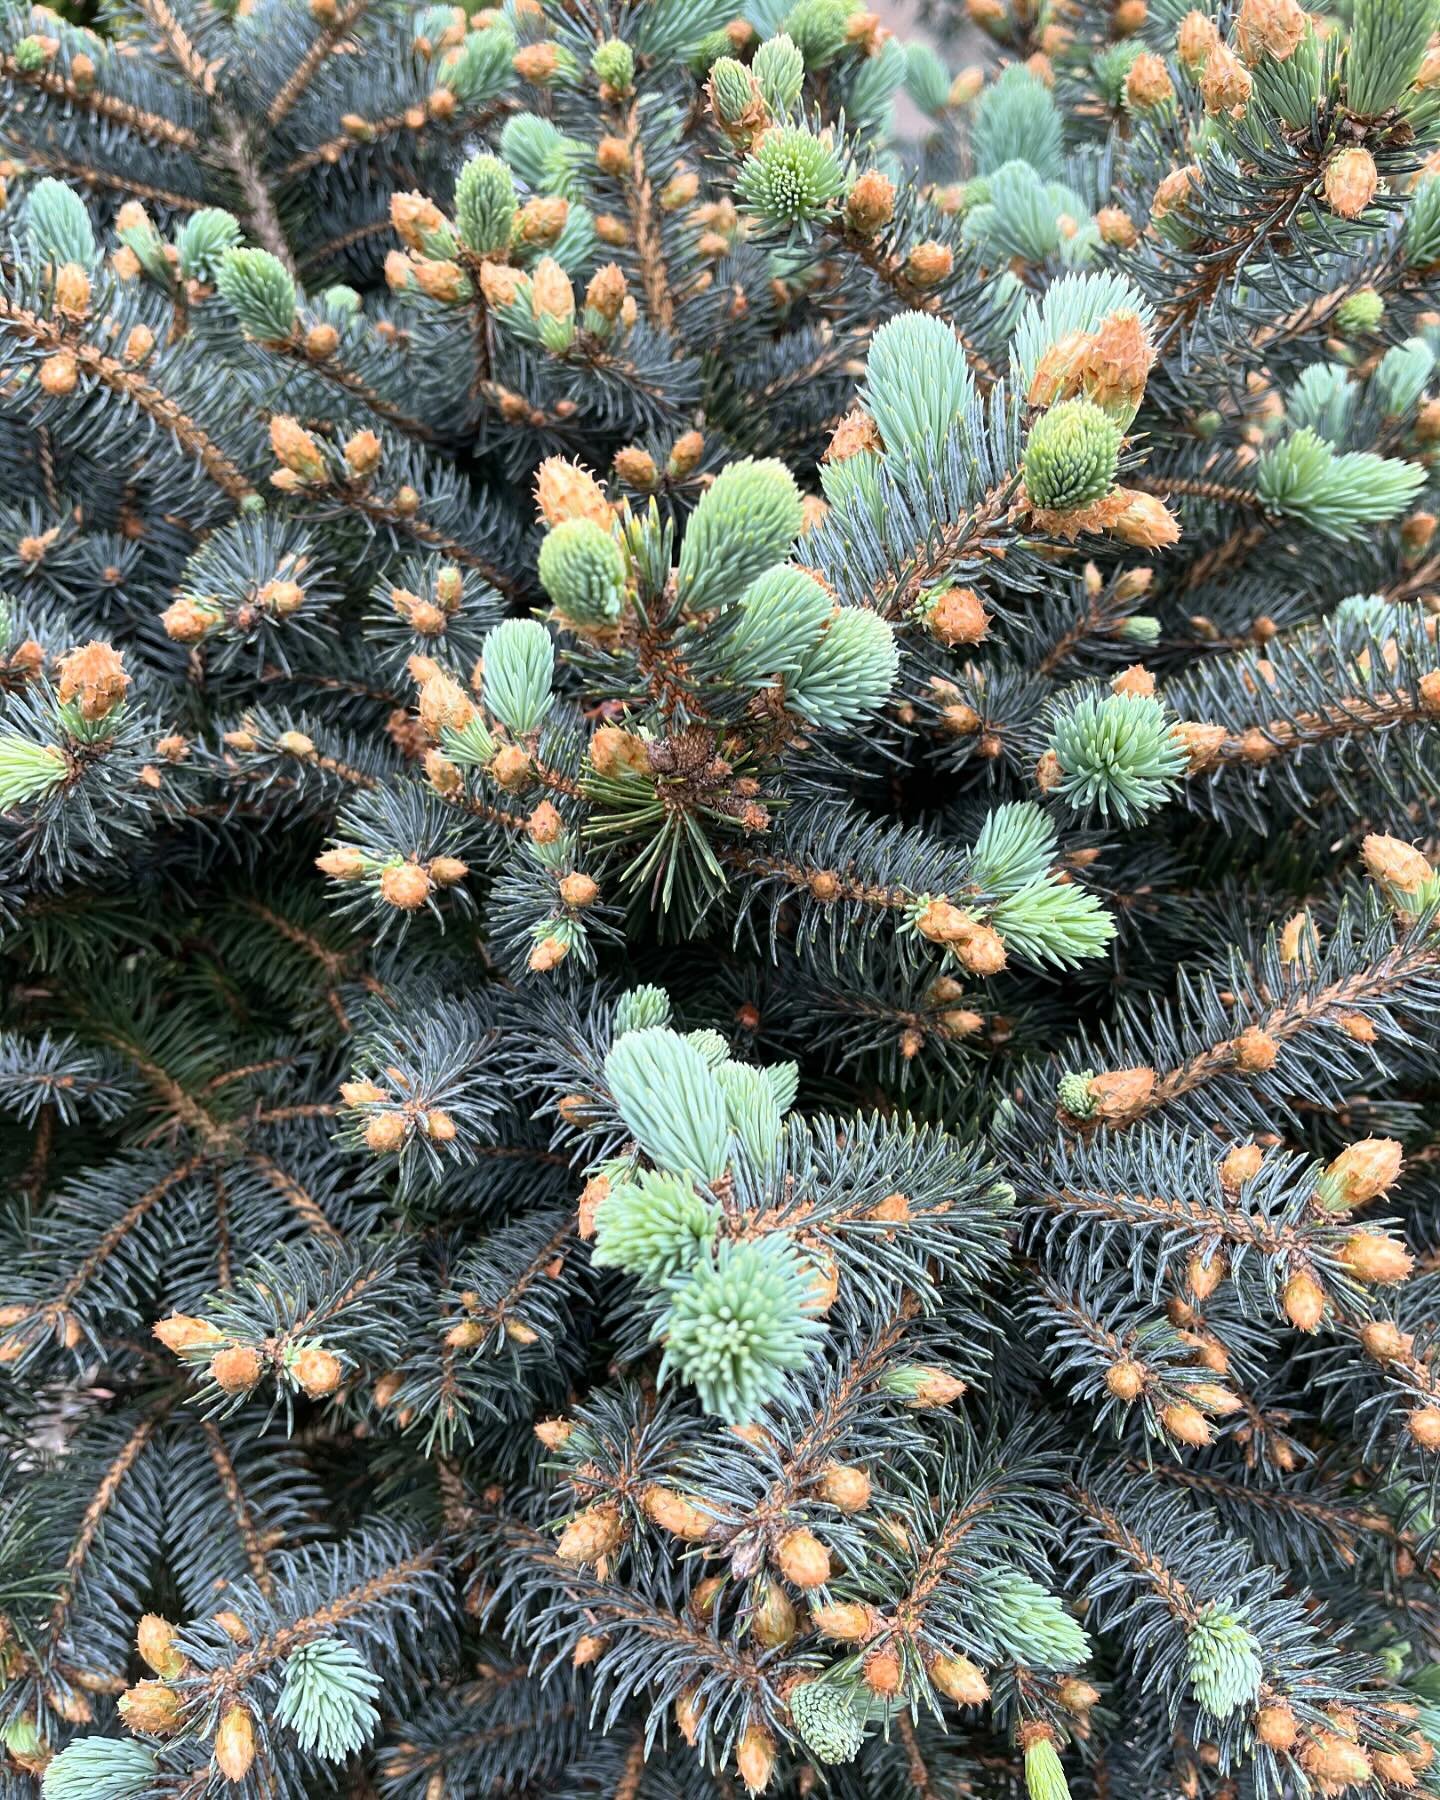 Check out some of our unique evergreens in the nursery! #uniqueplants